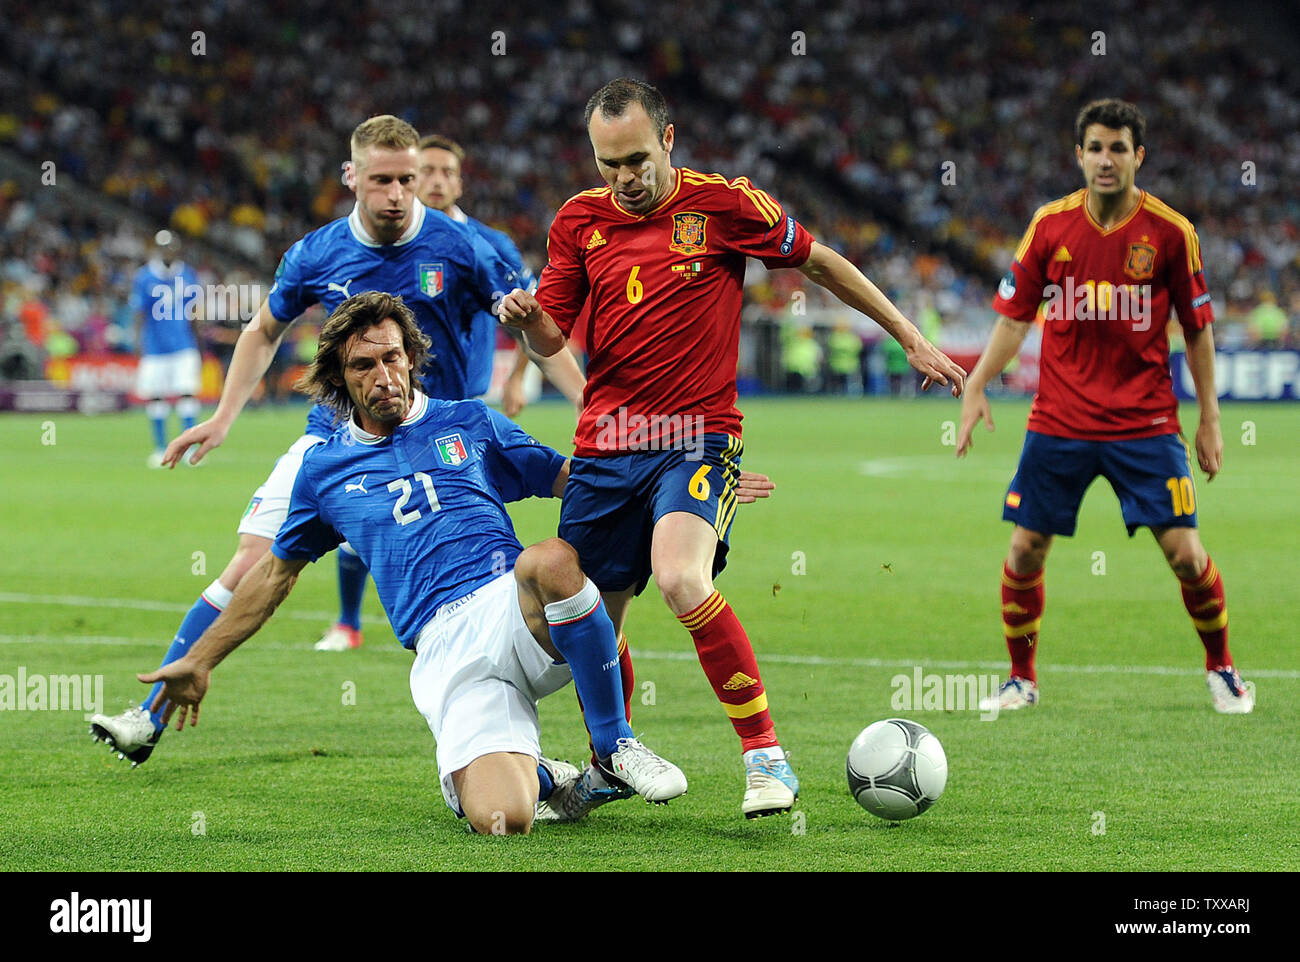 Andres Iniesta (R) of Spain is tackled by Andrea Pirlo of Italy during the Euro 2012 Final match at the Olympic Stadium in Kiev, Ukraine on July 1, 2012. UPI/Chris Brunskill Stock Photo